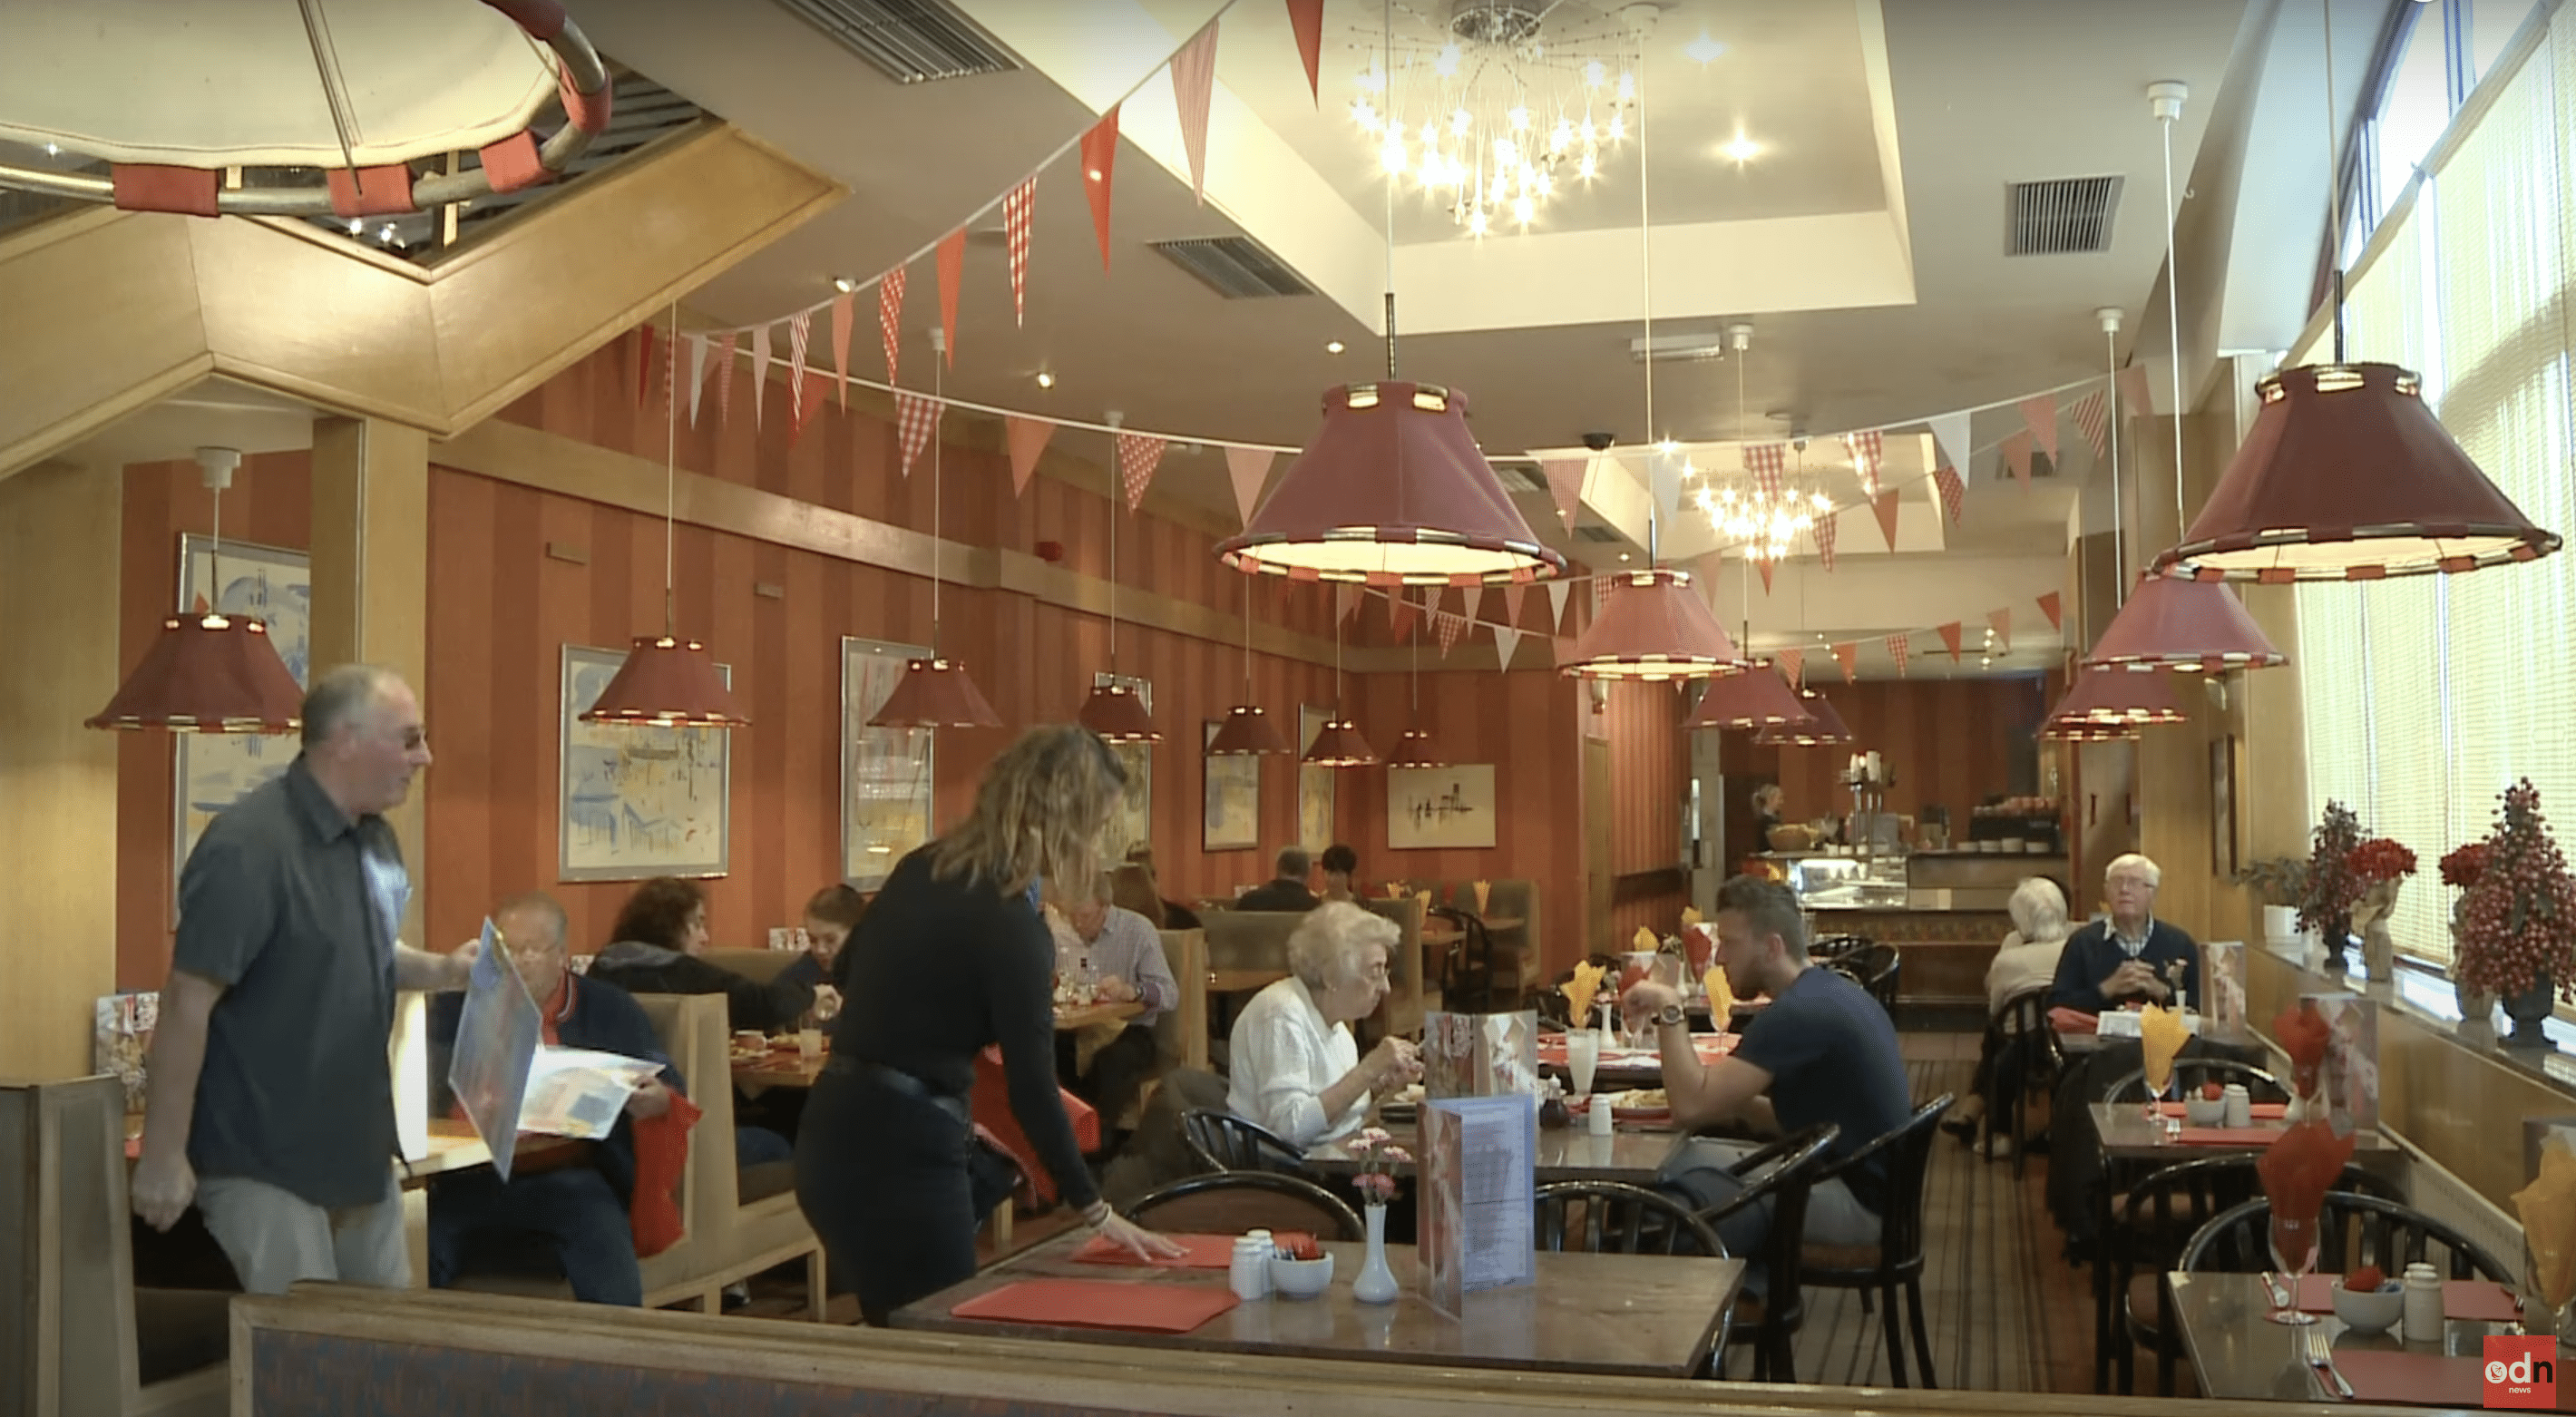 Congrave pictured setting up a table inside the cafe packed with customers. | Source: YouTube.com/On Demand News